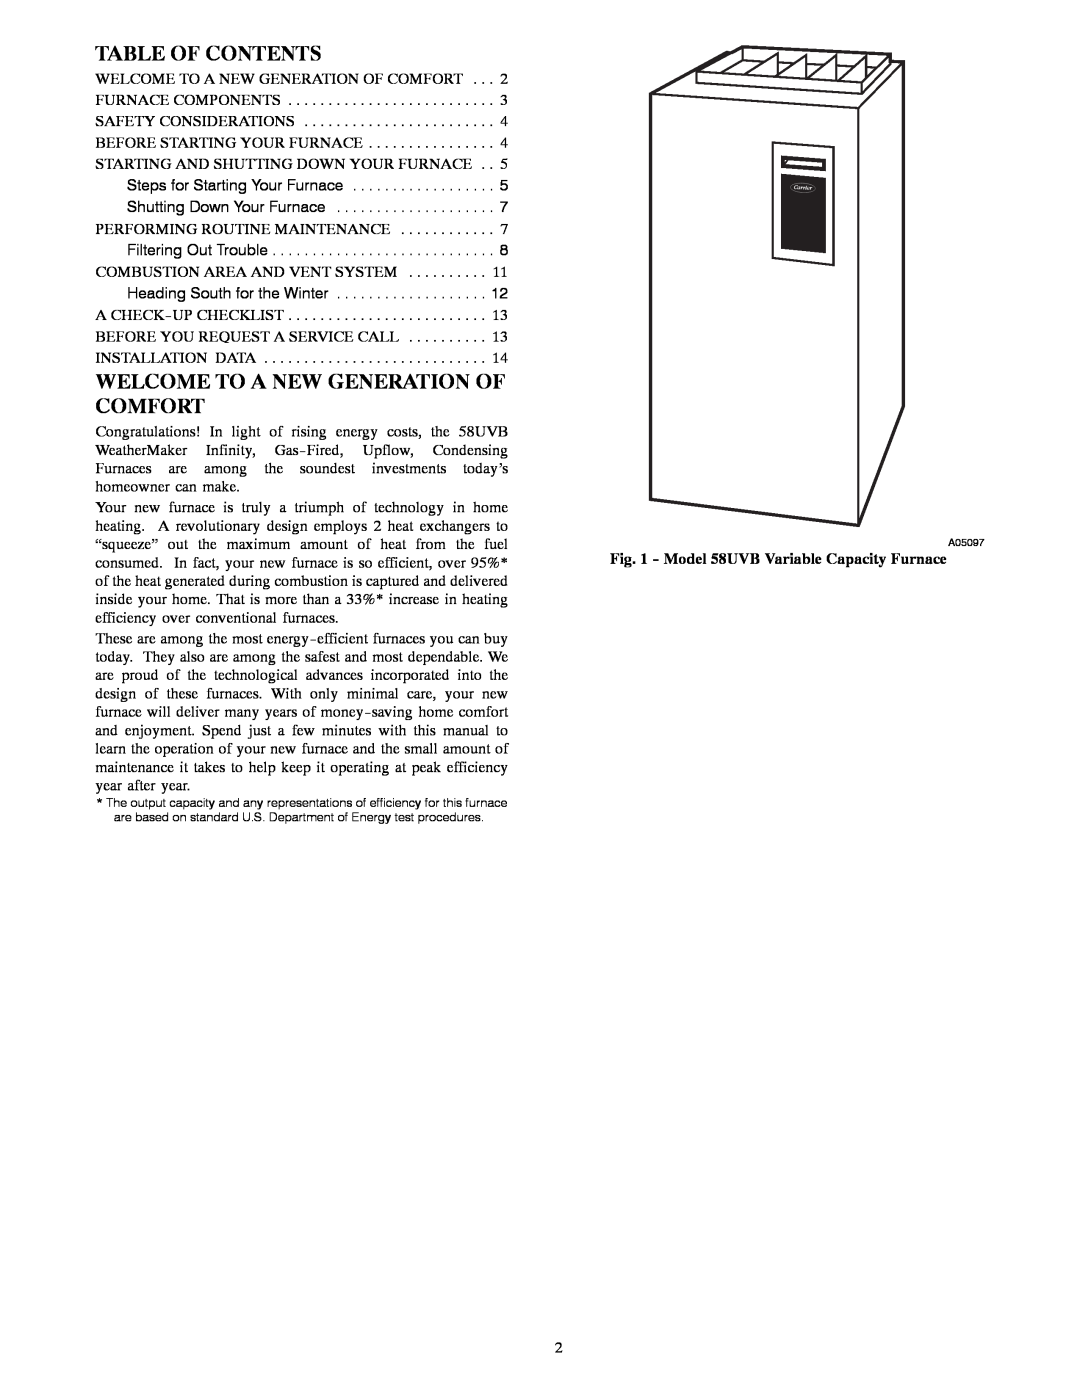 Carrier manual Table Of Contents, Welcome To A New Generation Of Comfort, Model 58UVB Variable Capacity Furnace 